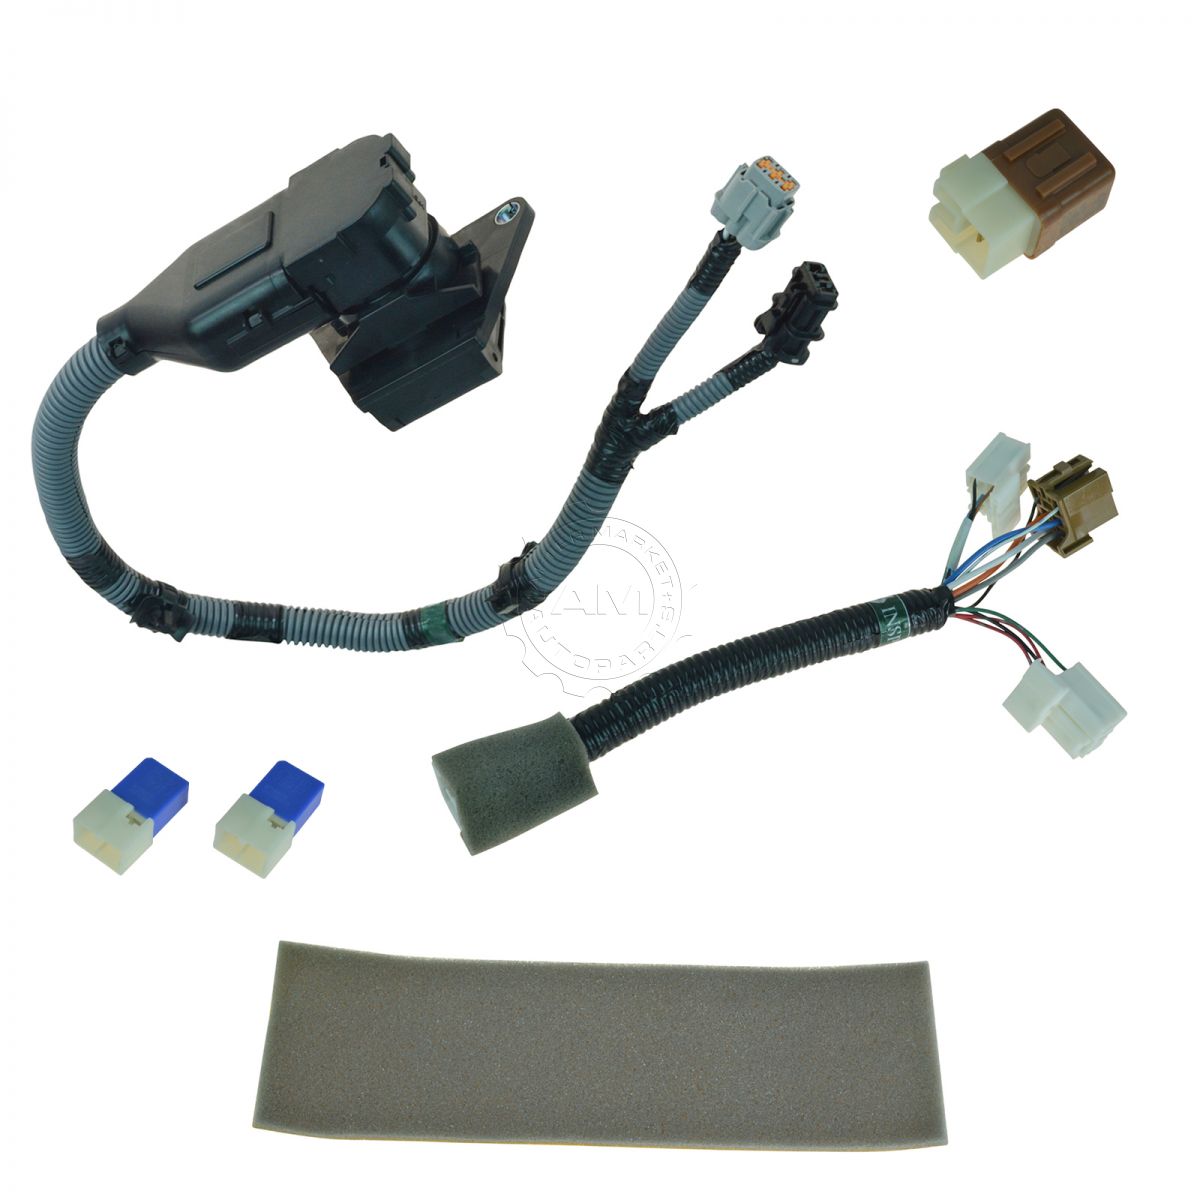 OEM-999T8BR020-Complete-7-Pin-Plug-&-Play-Tow-Harness-Kit-...